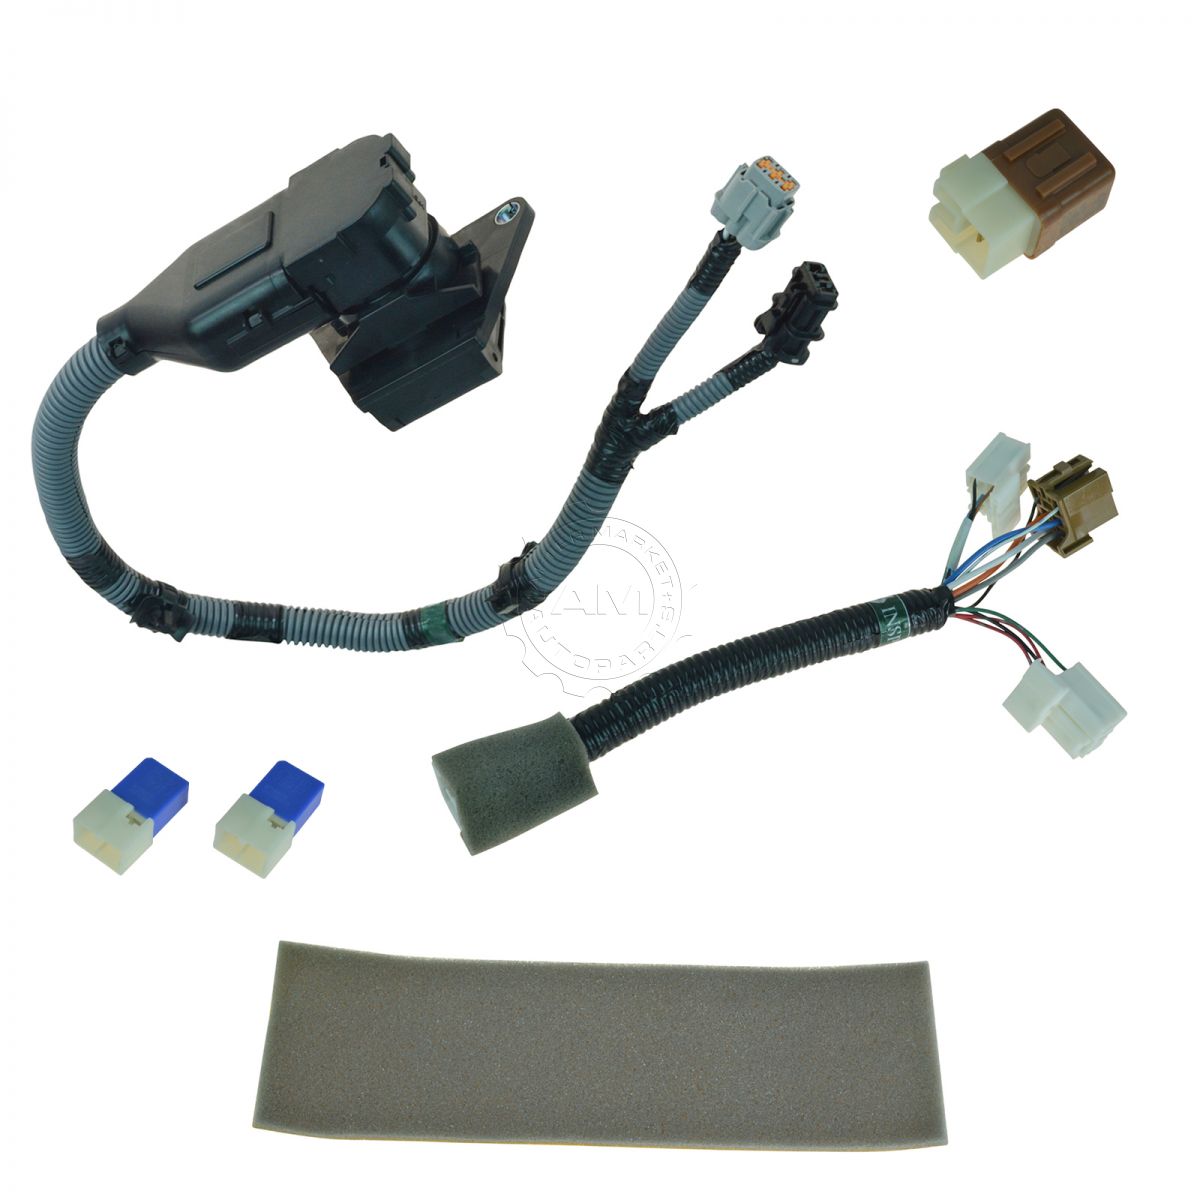 OEM-999T8BR020-Complete-7-Pin-Plug-&-Play-Tow-Harness-Kit-...